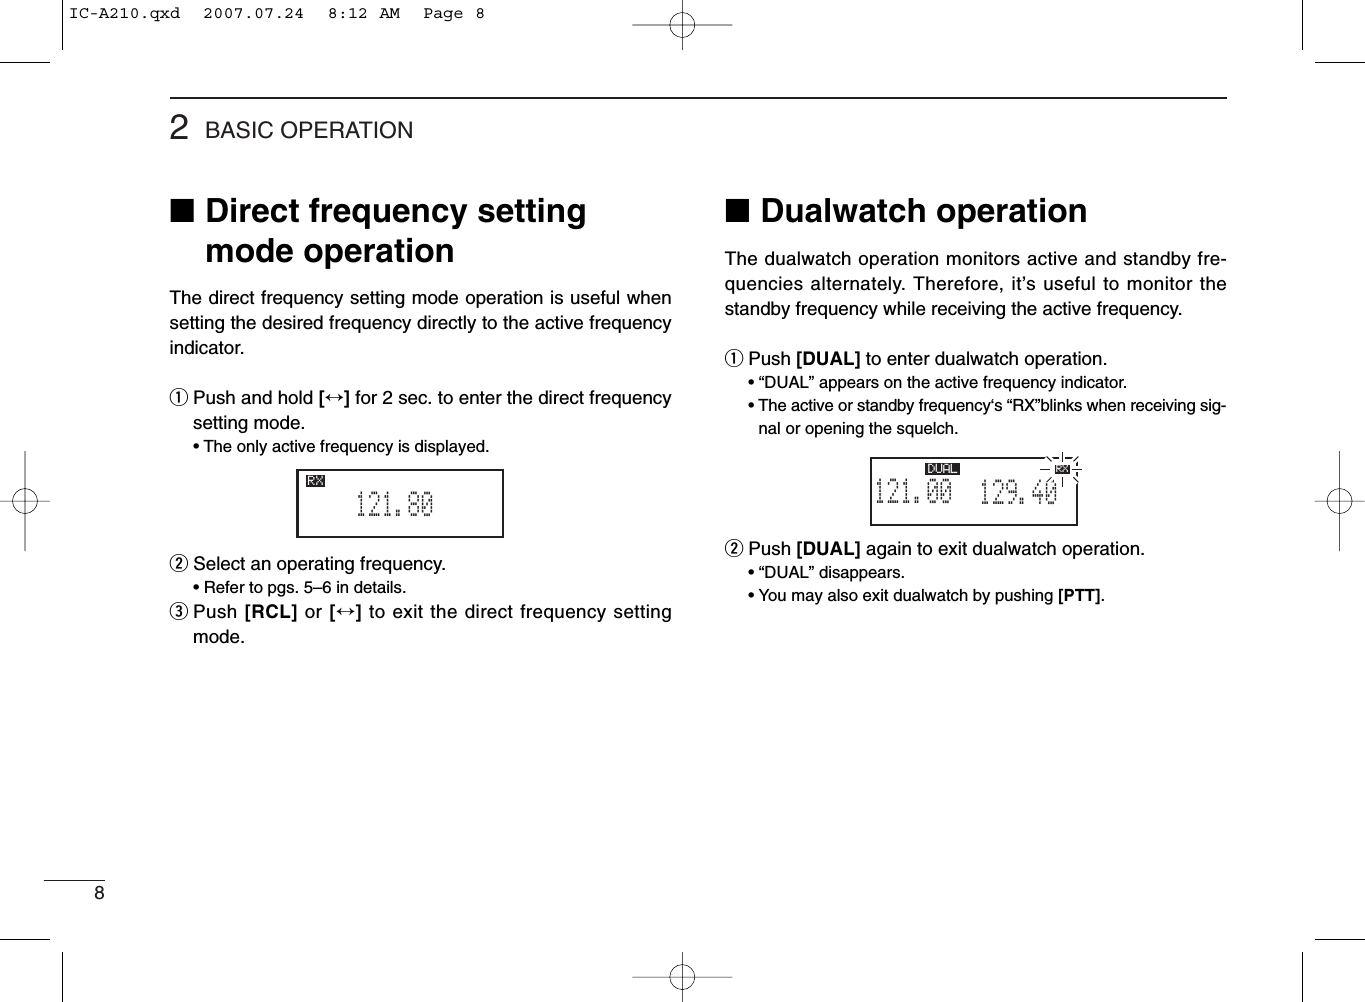 82BASIC OPERATION■Direct frequency settingmode operationThe direct frequency setting mode operation is useful whensetting the desired frequency directly to the active frequencyindicator.qPush and hold [↔]for 2 sec. to enter the direct frequencysetting mode.• The only active frequency is displayed.wSelect an operating frequency.• Refer to pgs. 5–6 in details.ePush [RCL] or [↔]to exit the direct frequency settingmode.■Dualwatch operationThe dualwatch operation monitors active and standby fre-quencies alternately. Therefore, it’s useful to monitor thestandby frequency while receiving the active frequency.qPush [DUAL] to enter dualwatch operation.• “DUAL” appears on the active frequency indicator.• The active or standby frequency‘s “RX”blinks when receiving sig-nal or opening the squelch.wPush [DUAL] again to exit dualwatch operation.• “DUAL” disappears.• You may also exit dualwatch by pushing [PTT].121.80RX129.405121.00RX DUAL RXIC-A210.qxd  2007.07.24  8:12 AM  Page 8